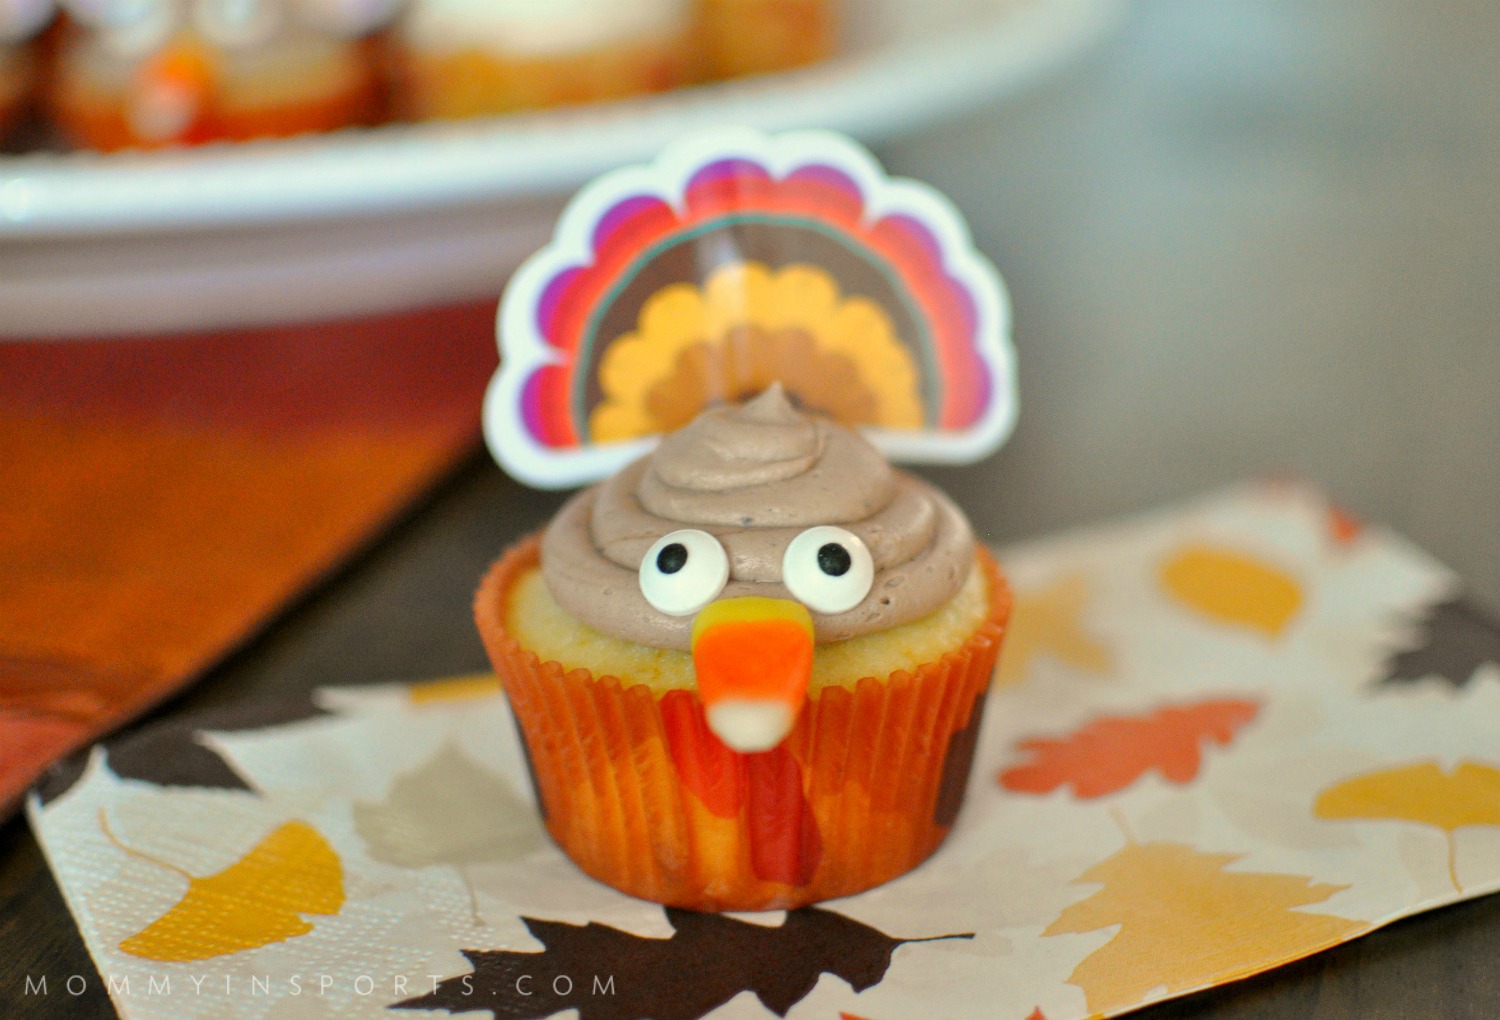 Need a dessert your friends and family will gobble up on Thanksgiving? Try these too cute Thanksgiving Turkey Cupcakes